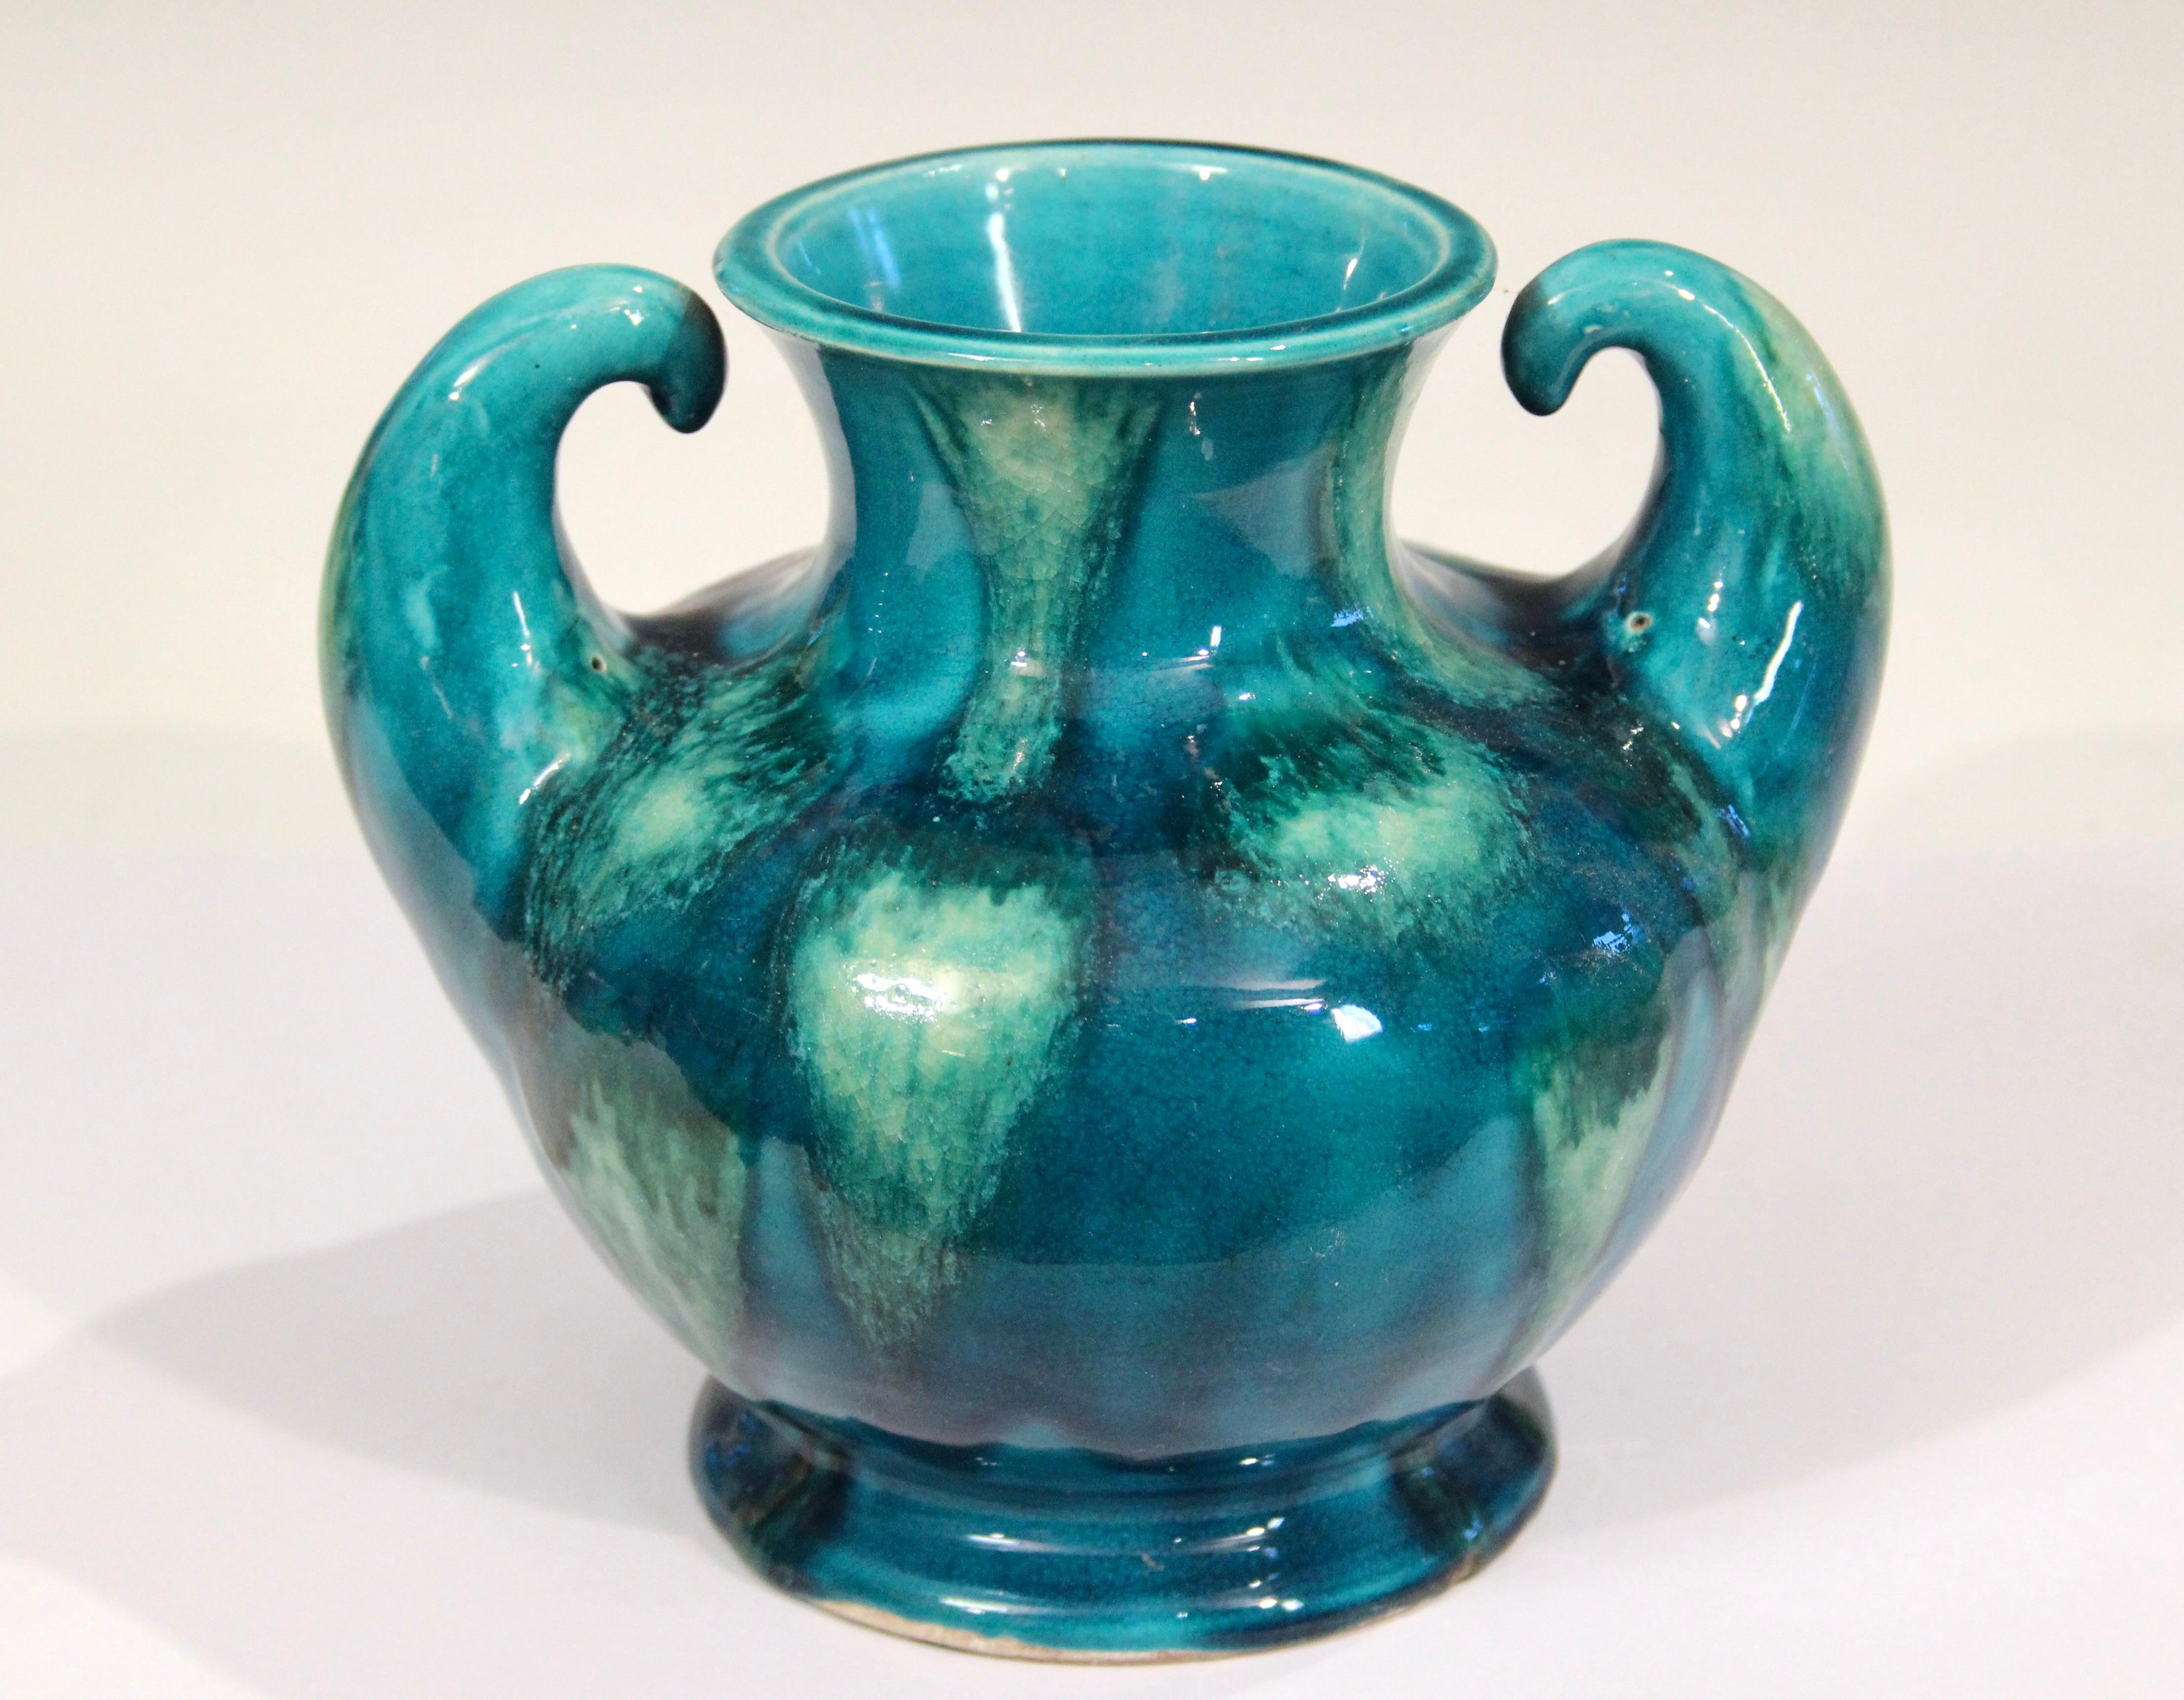 Awaji Pottery Art Deco Japanese Vintage Studio Muscle Vase Blue Green Flambe In Excellent Condition For Sale In Wilton, CT